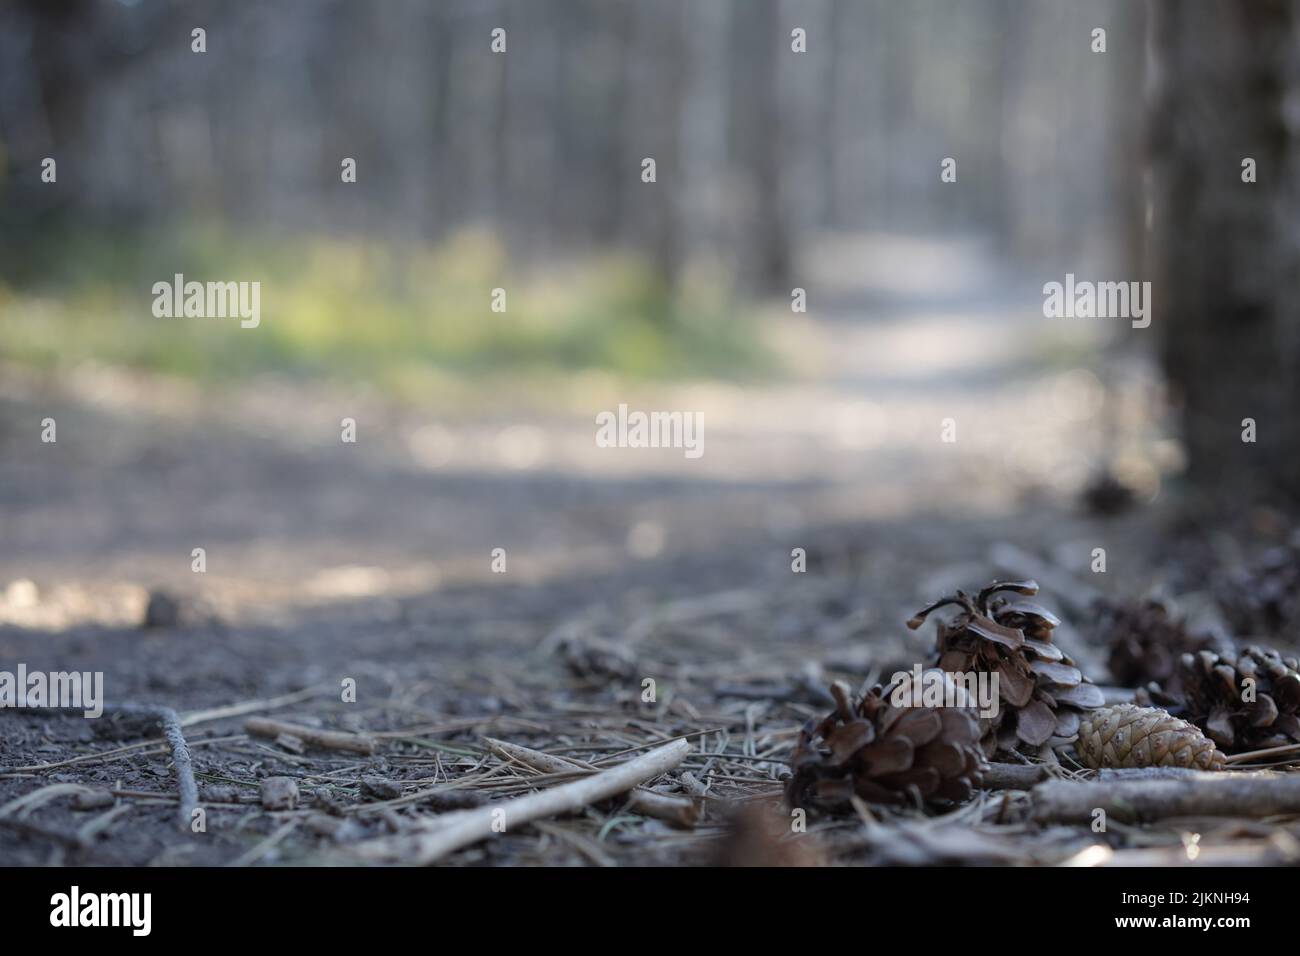 A selective focus of fallen cones and tree branches on the background of a forest Stock Photo